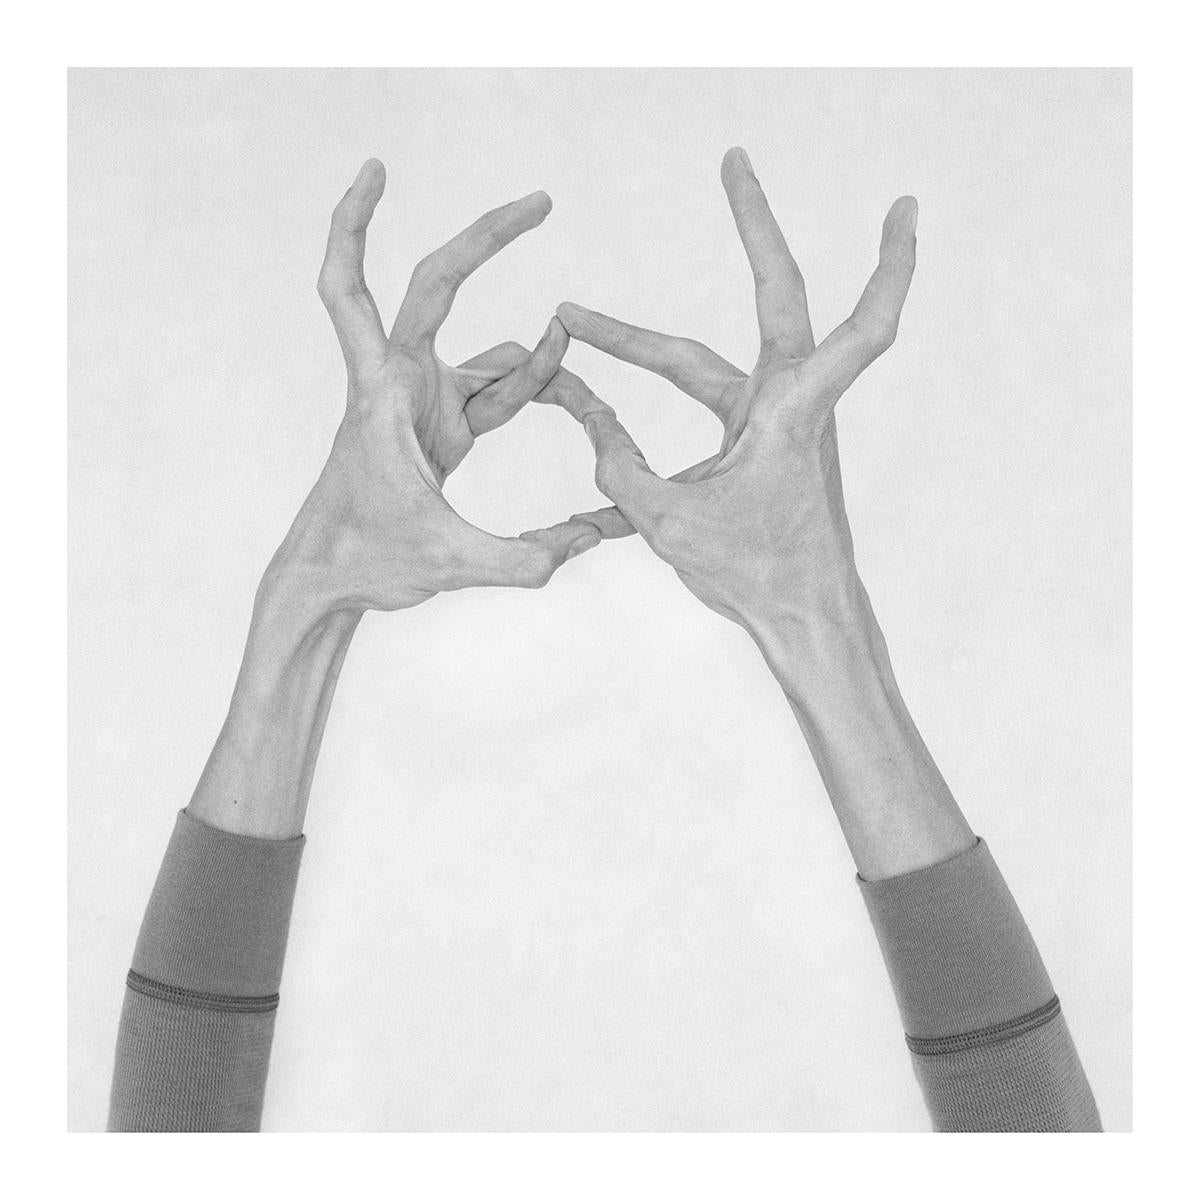 Untitled XXIII, XXIV, and XXV. Hands  From the Series Chiromorphose.  - Photograph by Nico Baixas / Gos-com-fuig